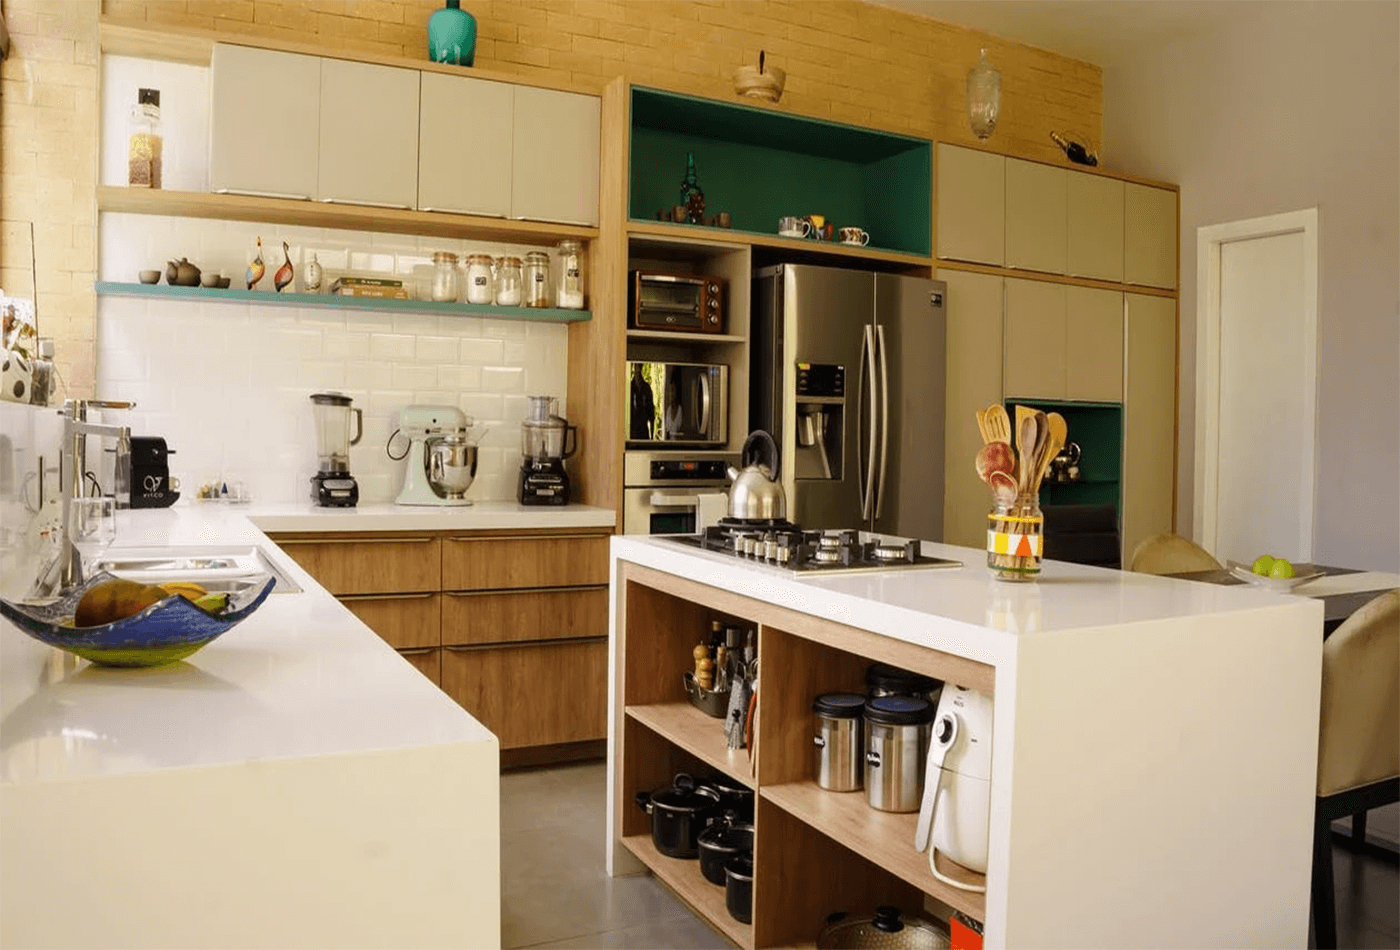 worktop and cabinets